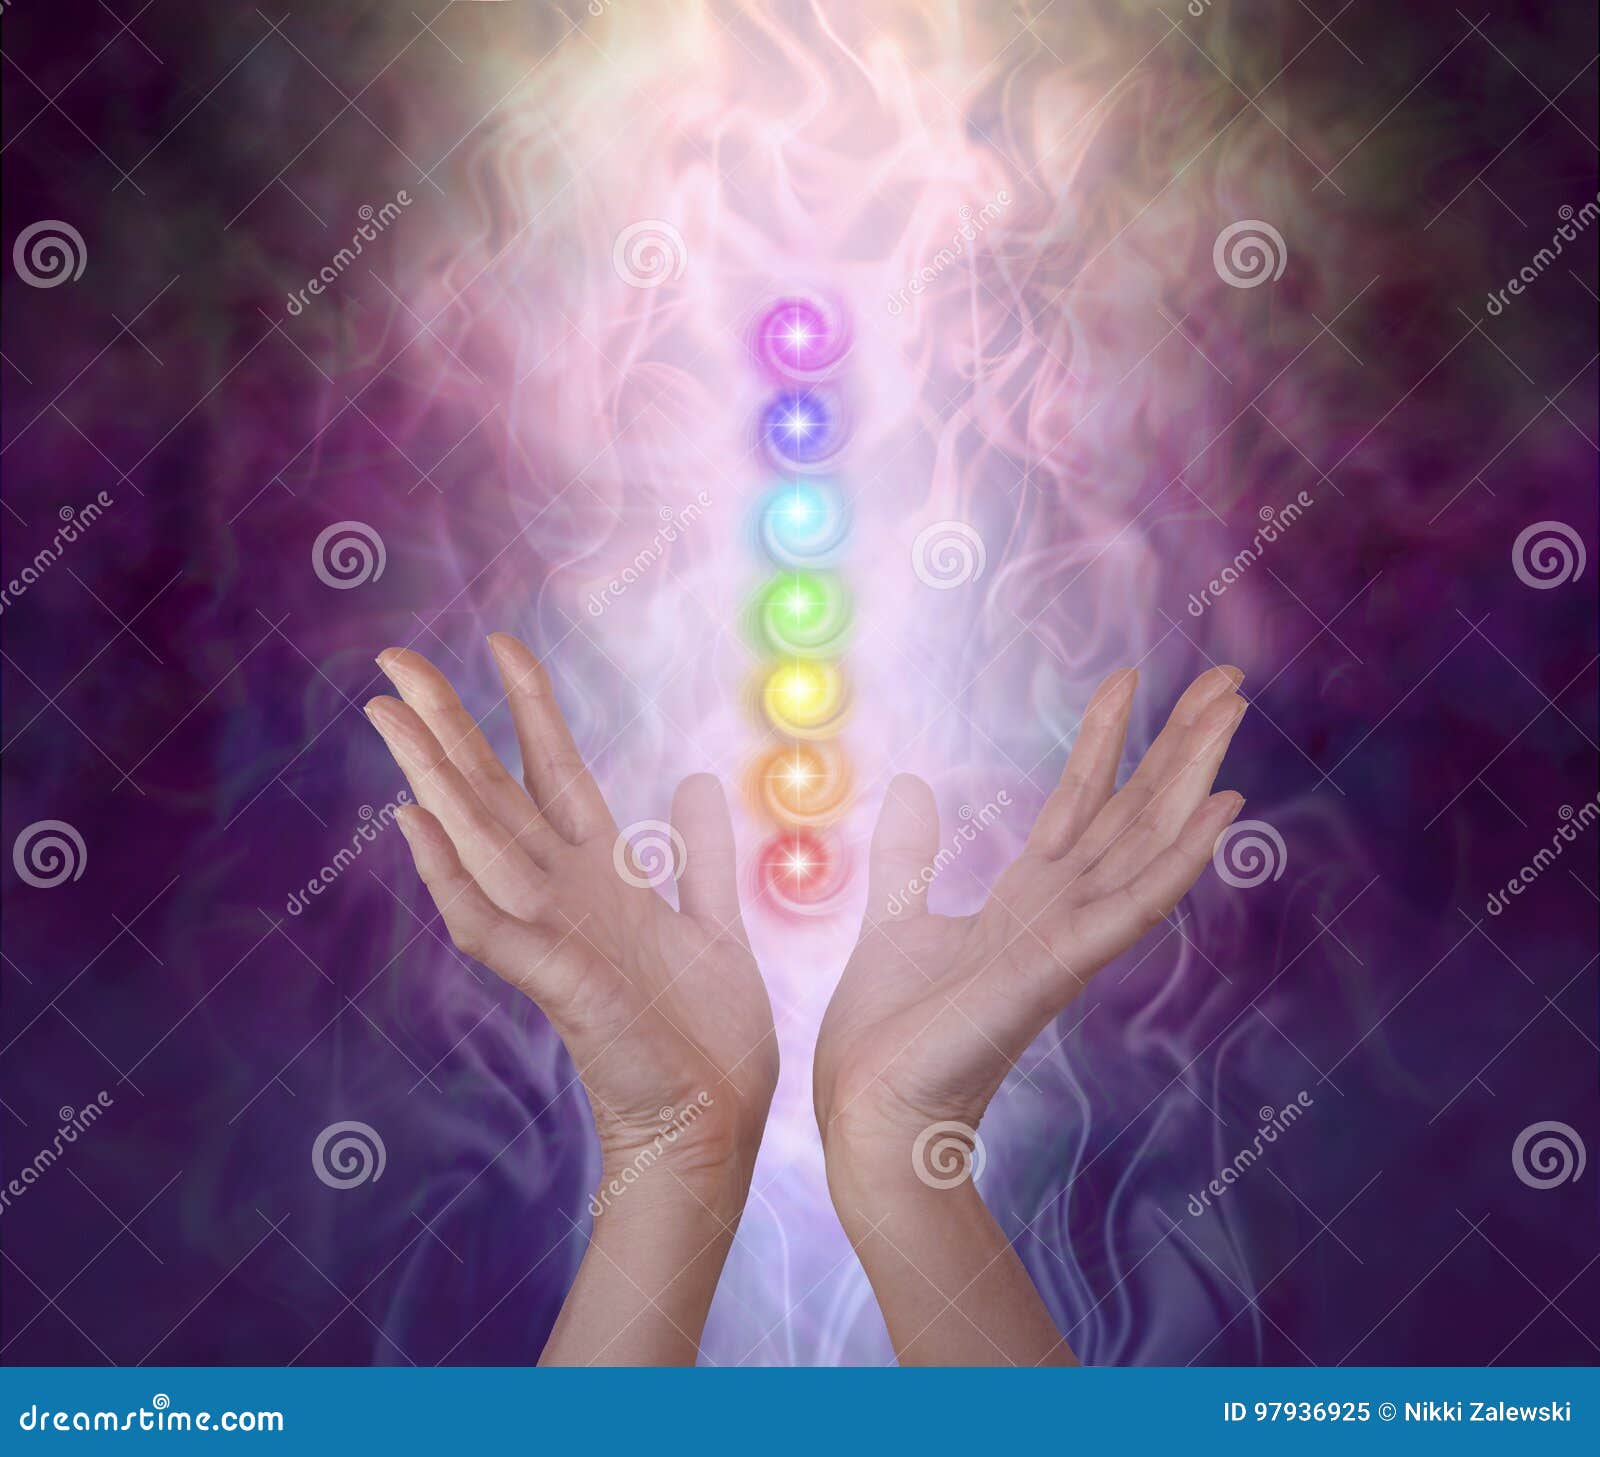 working with the seven major chakra energy vortexes